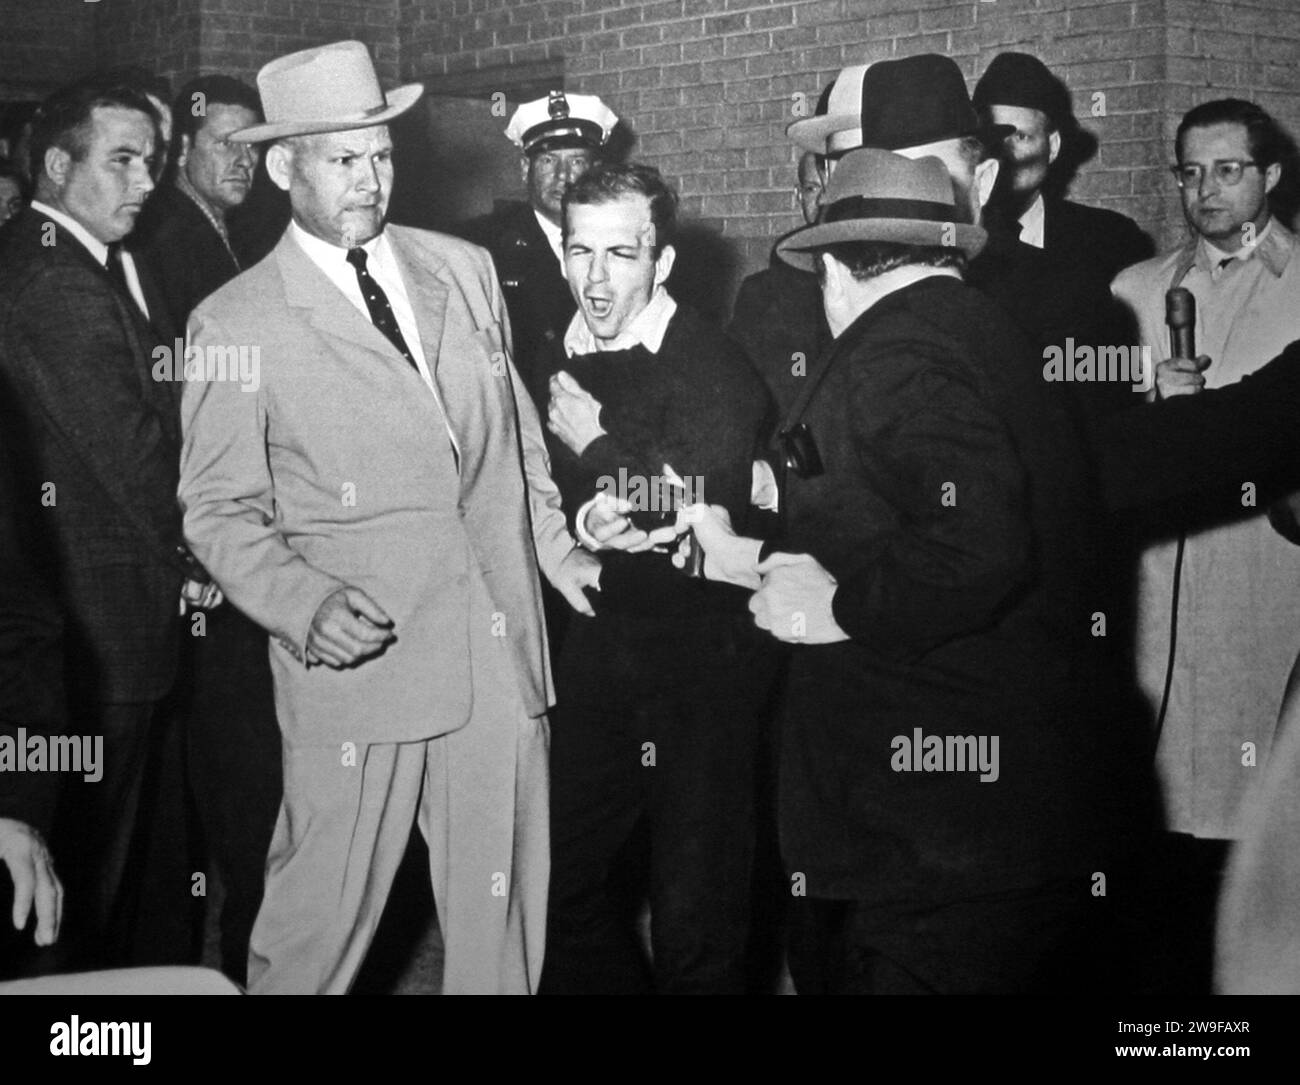 Jack Ruby (52) shoots Lee Harvey Oswald (24). Winner of the 1964 Pulitzer Prize for Photography by Robert H. Jackson Ruby shooting Oswald, who is being escorted by Dallas police. Detective Jim Leavelle is wearing the tan suit. L. C. Graves is with the black hat. Stock Photo